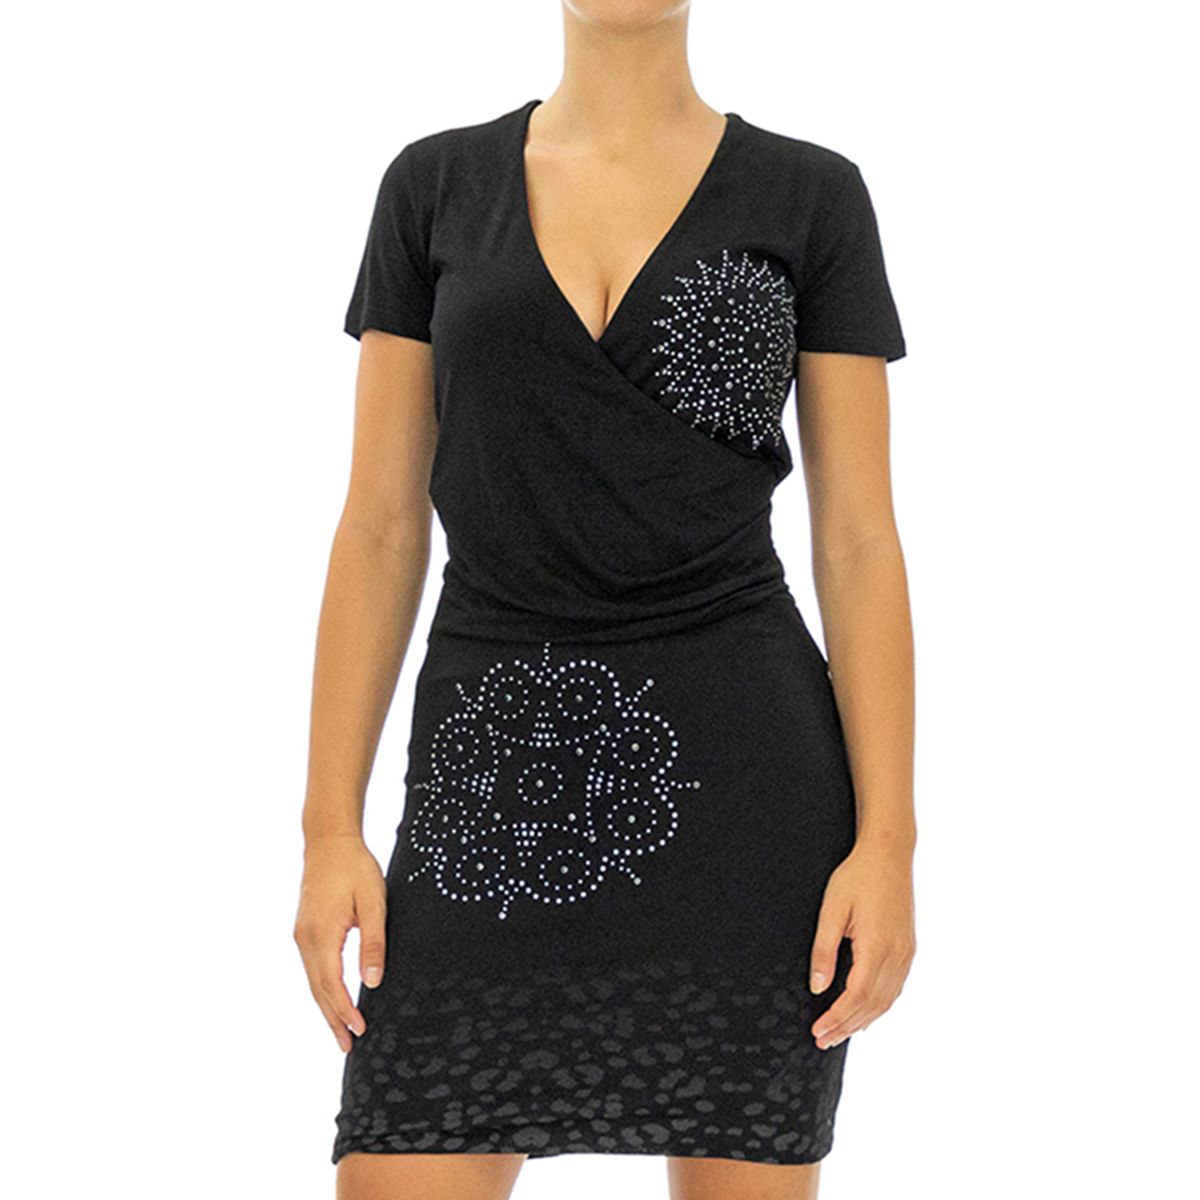 Desigual 56V20Y3-2000-M Simple and versatile, this black dress can be worn both during the day and at night.